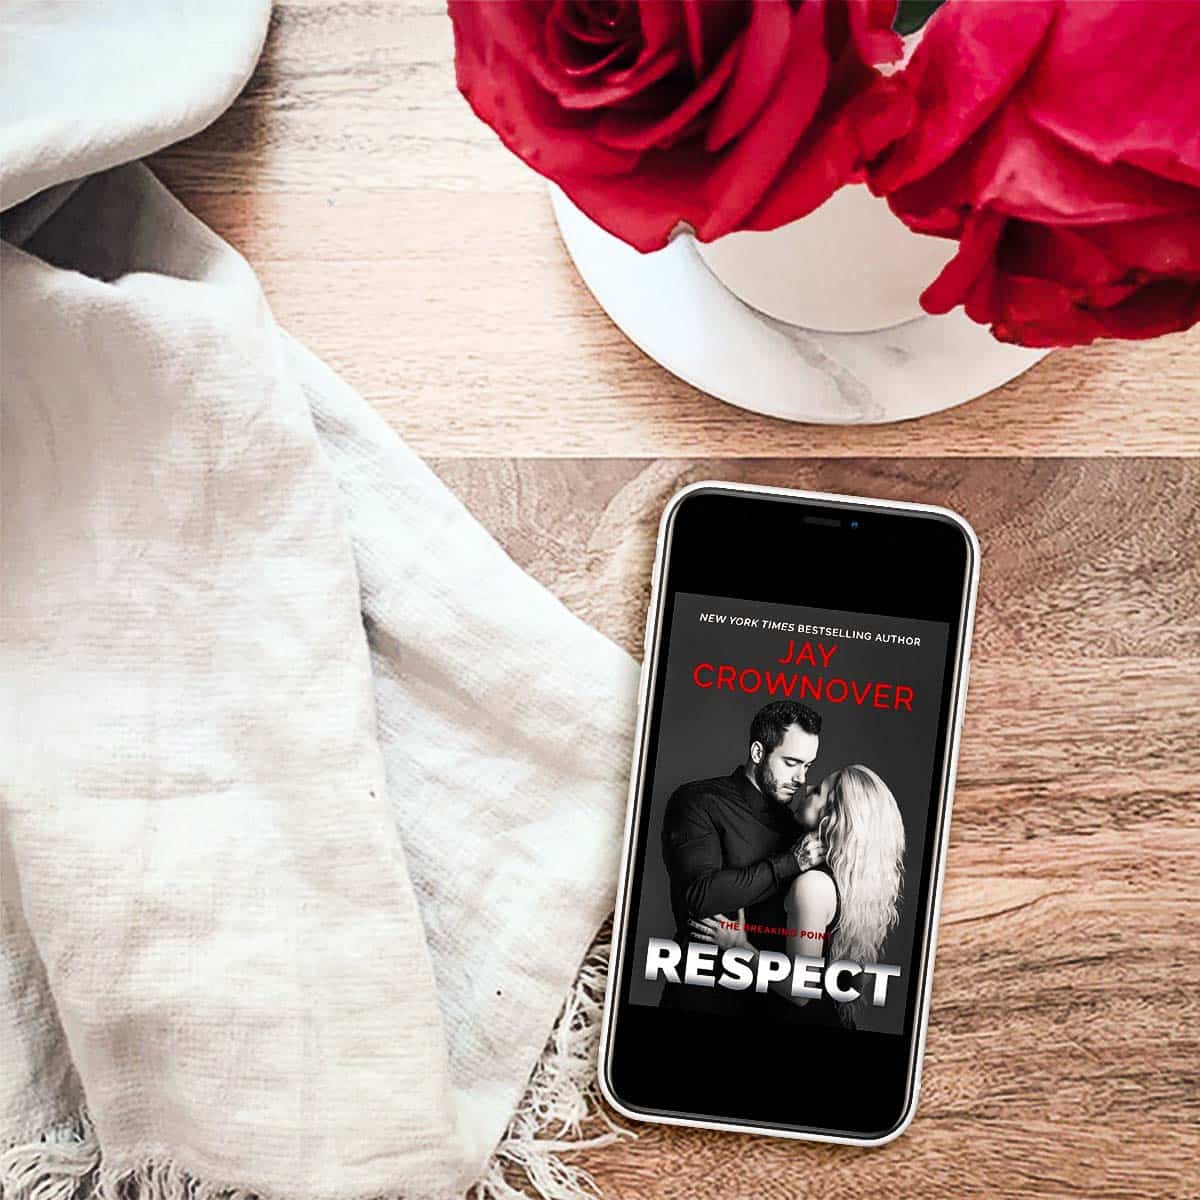 Respect by Jay Crownover, a suspenseful age gap mafia romance, gives us delectable tension, explosive chemistry, and life-endangering drama, along with a long-awaited HEA!